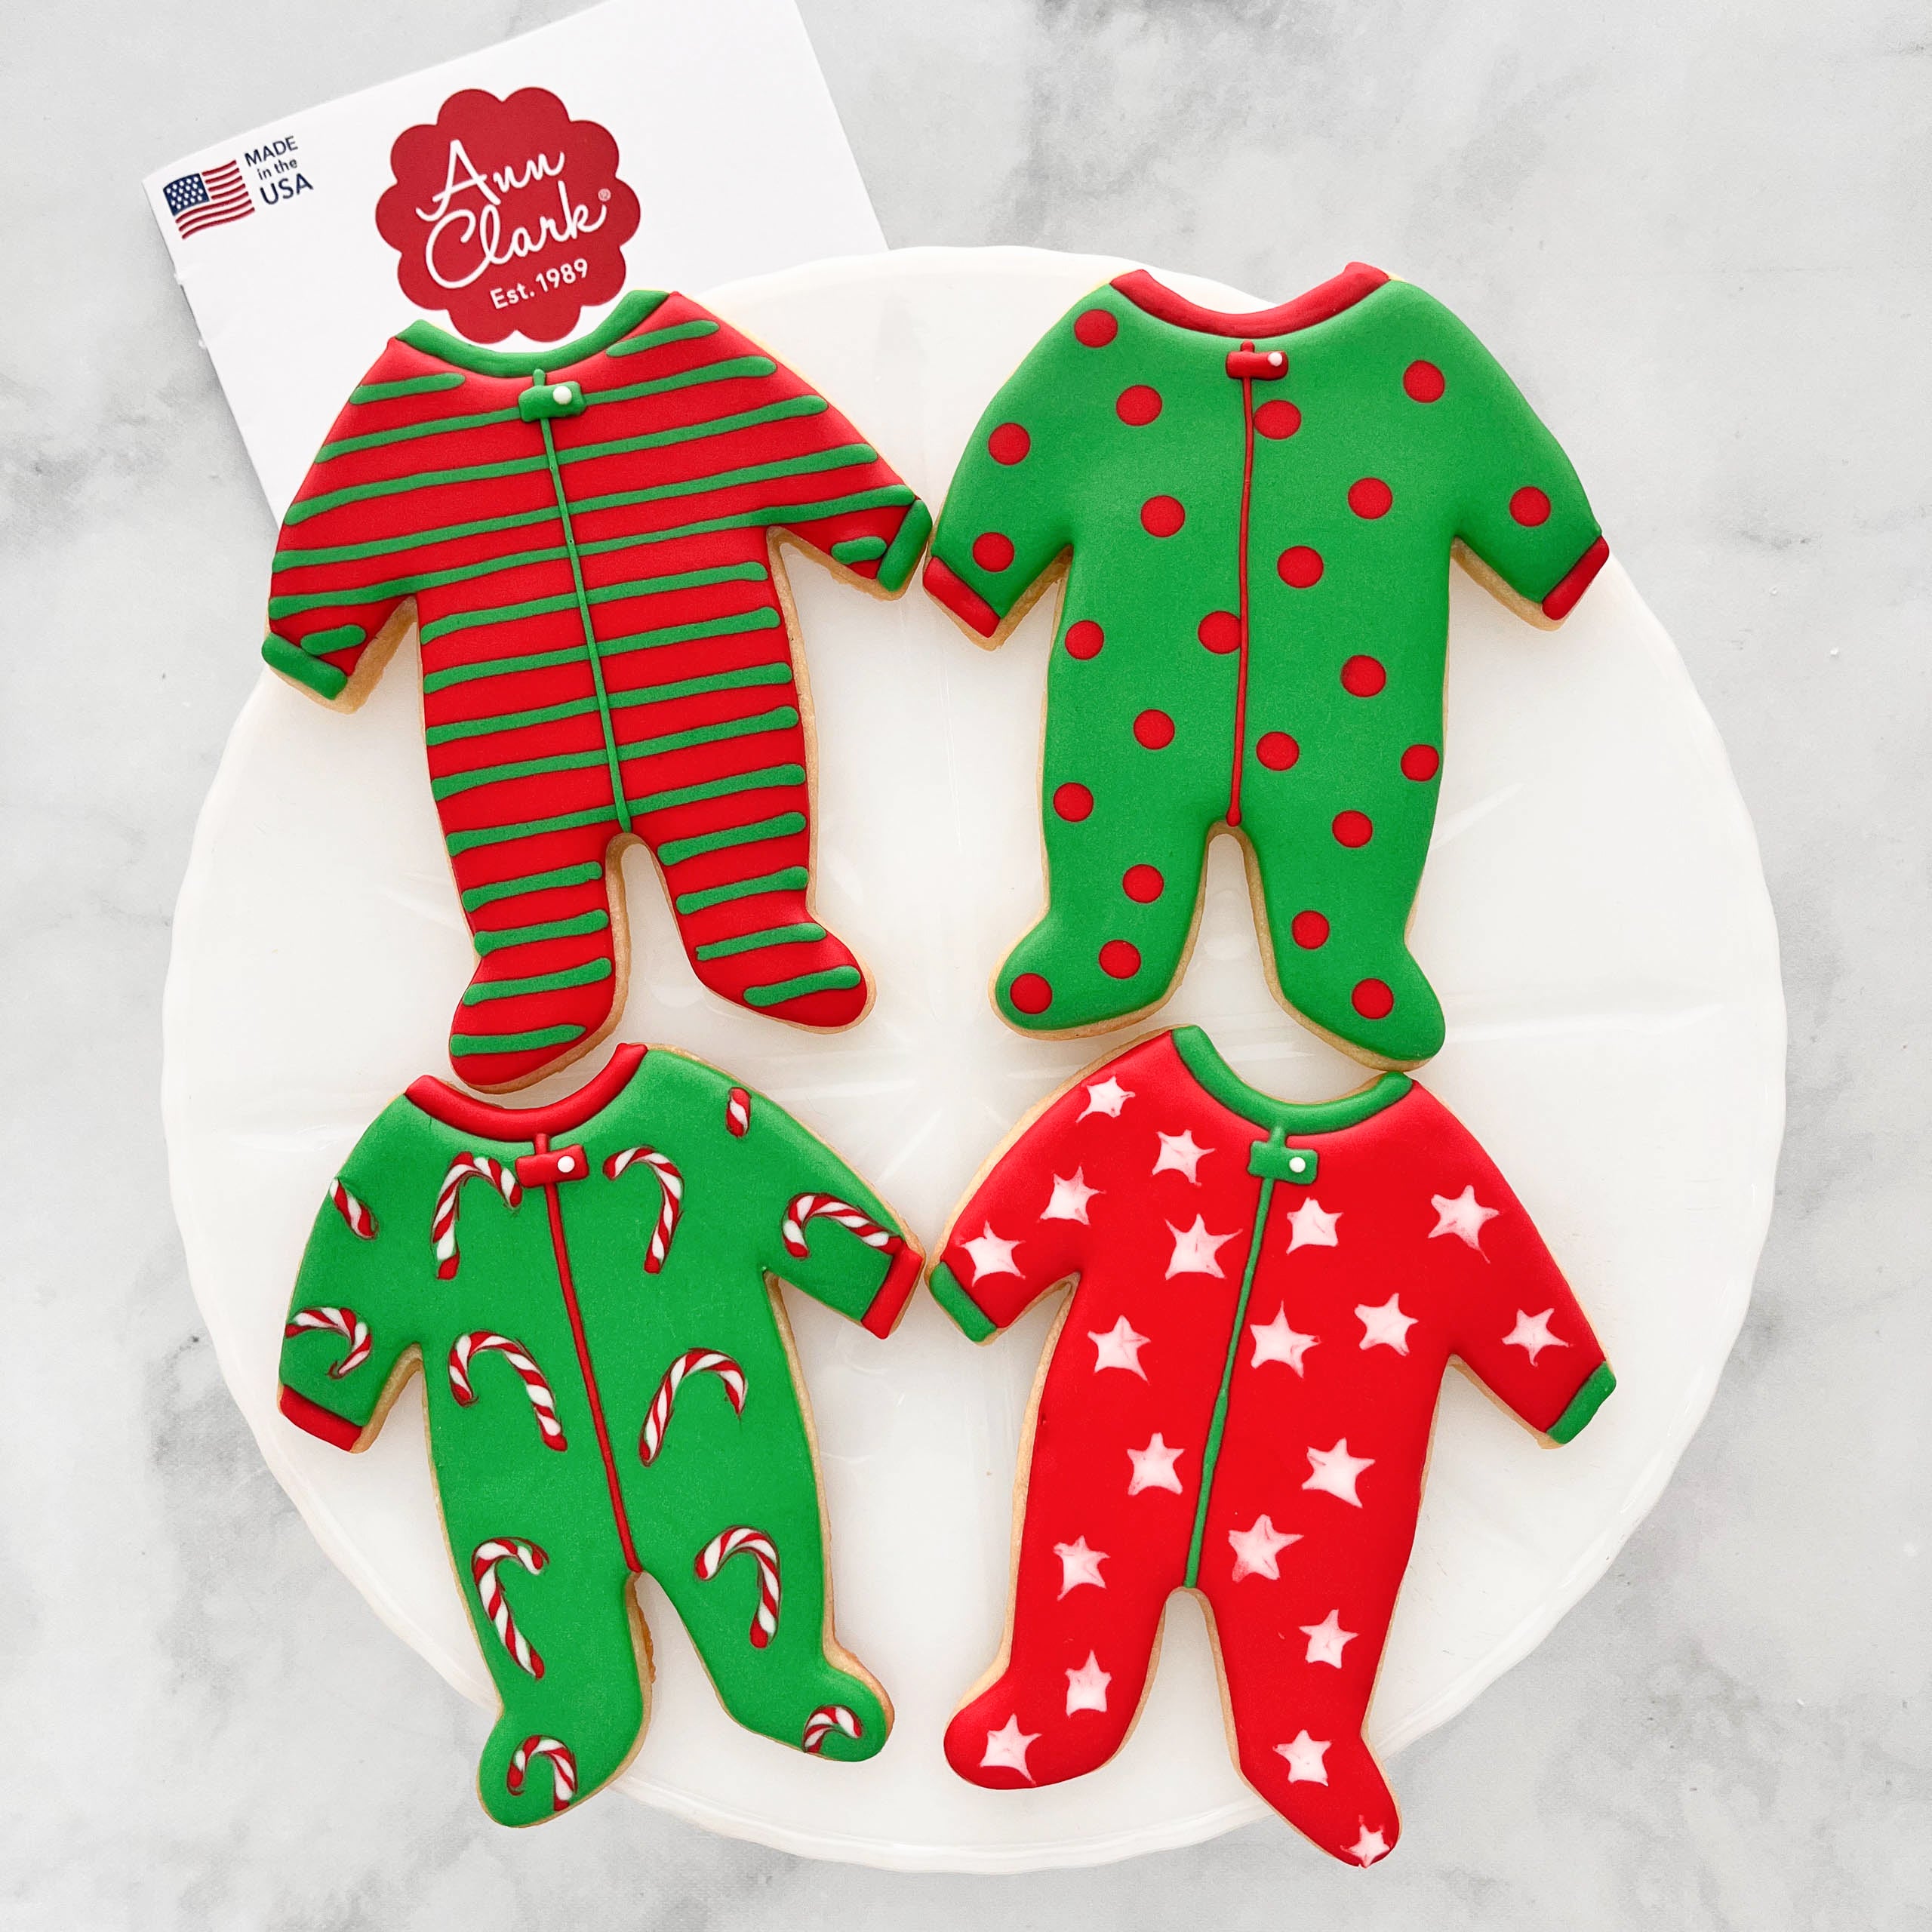 Four pajama-shaped sugar cookies decorated with red and green royal icing.